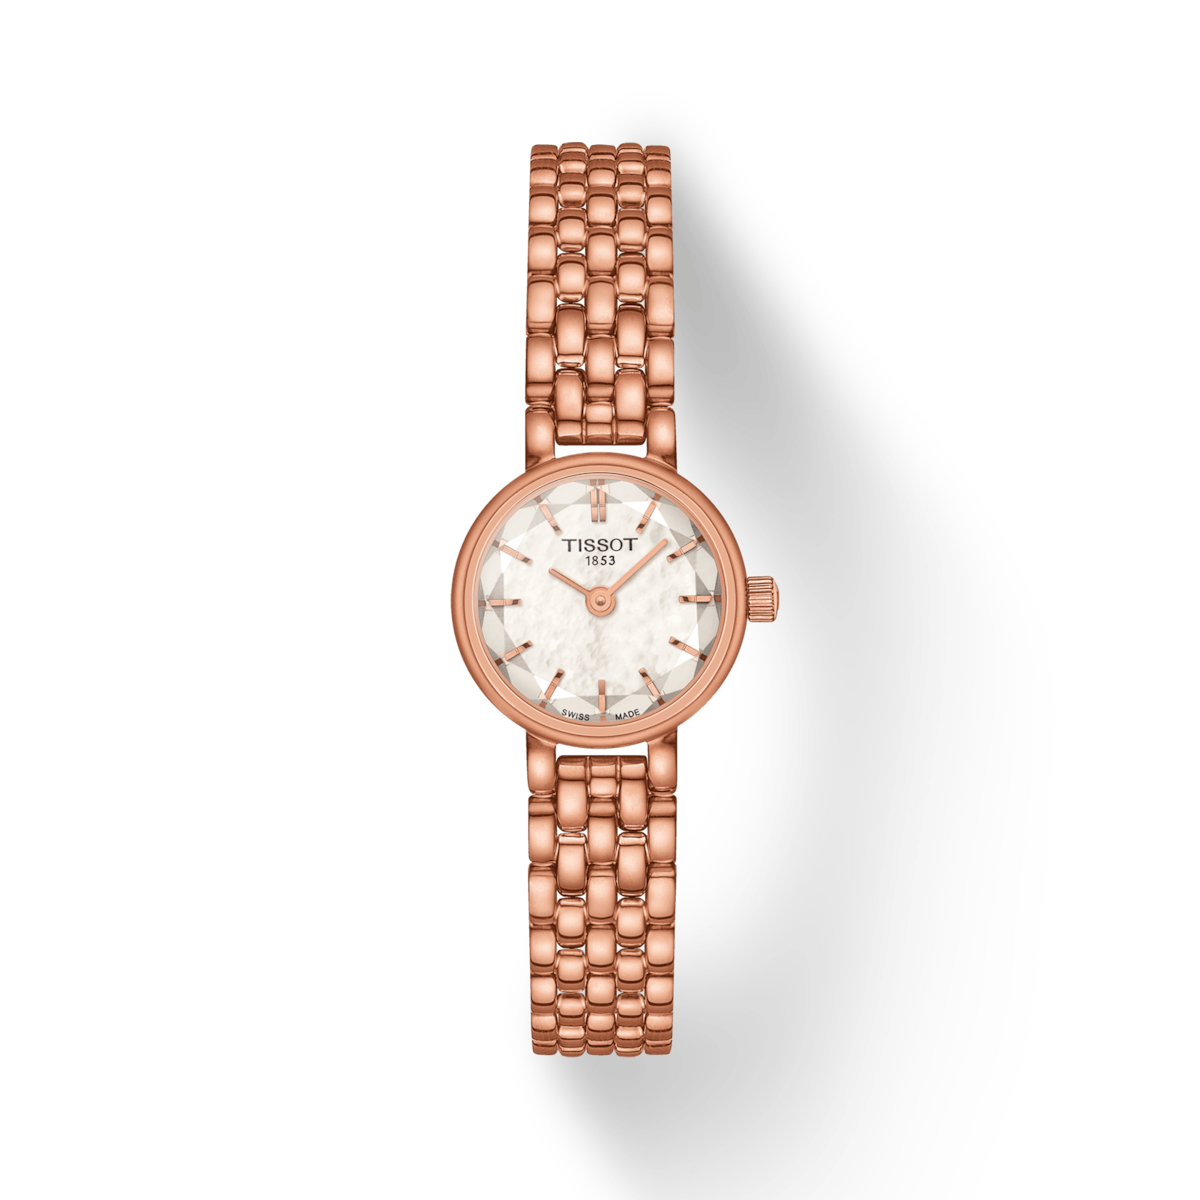 T-Lady Lovely Round Rose Gold